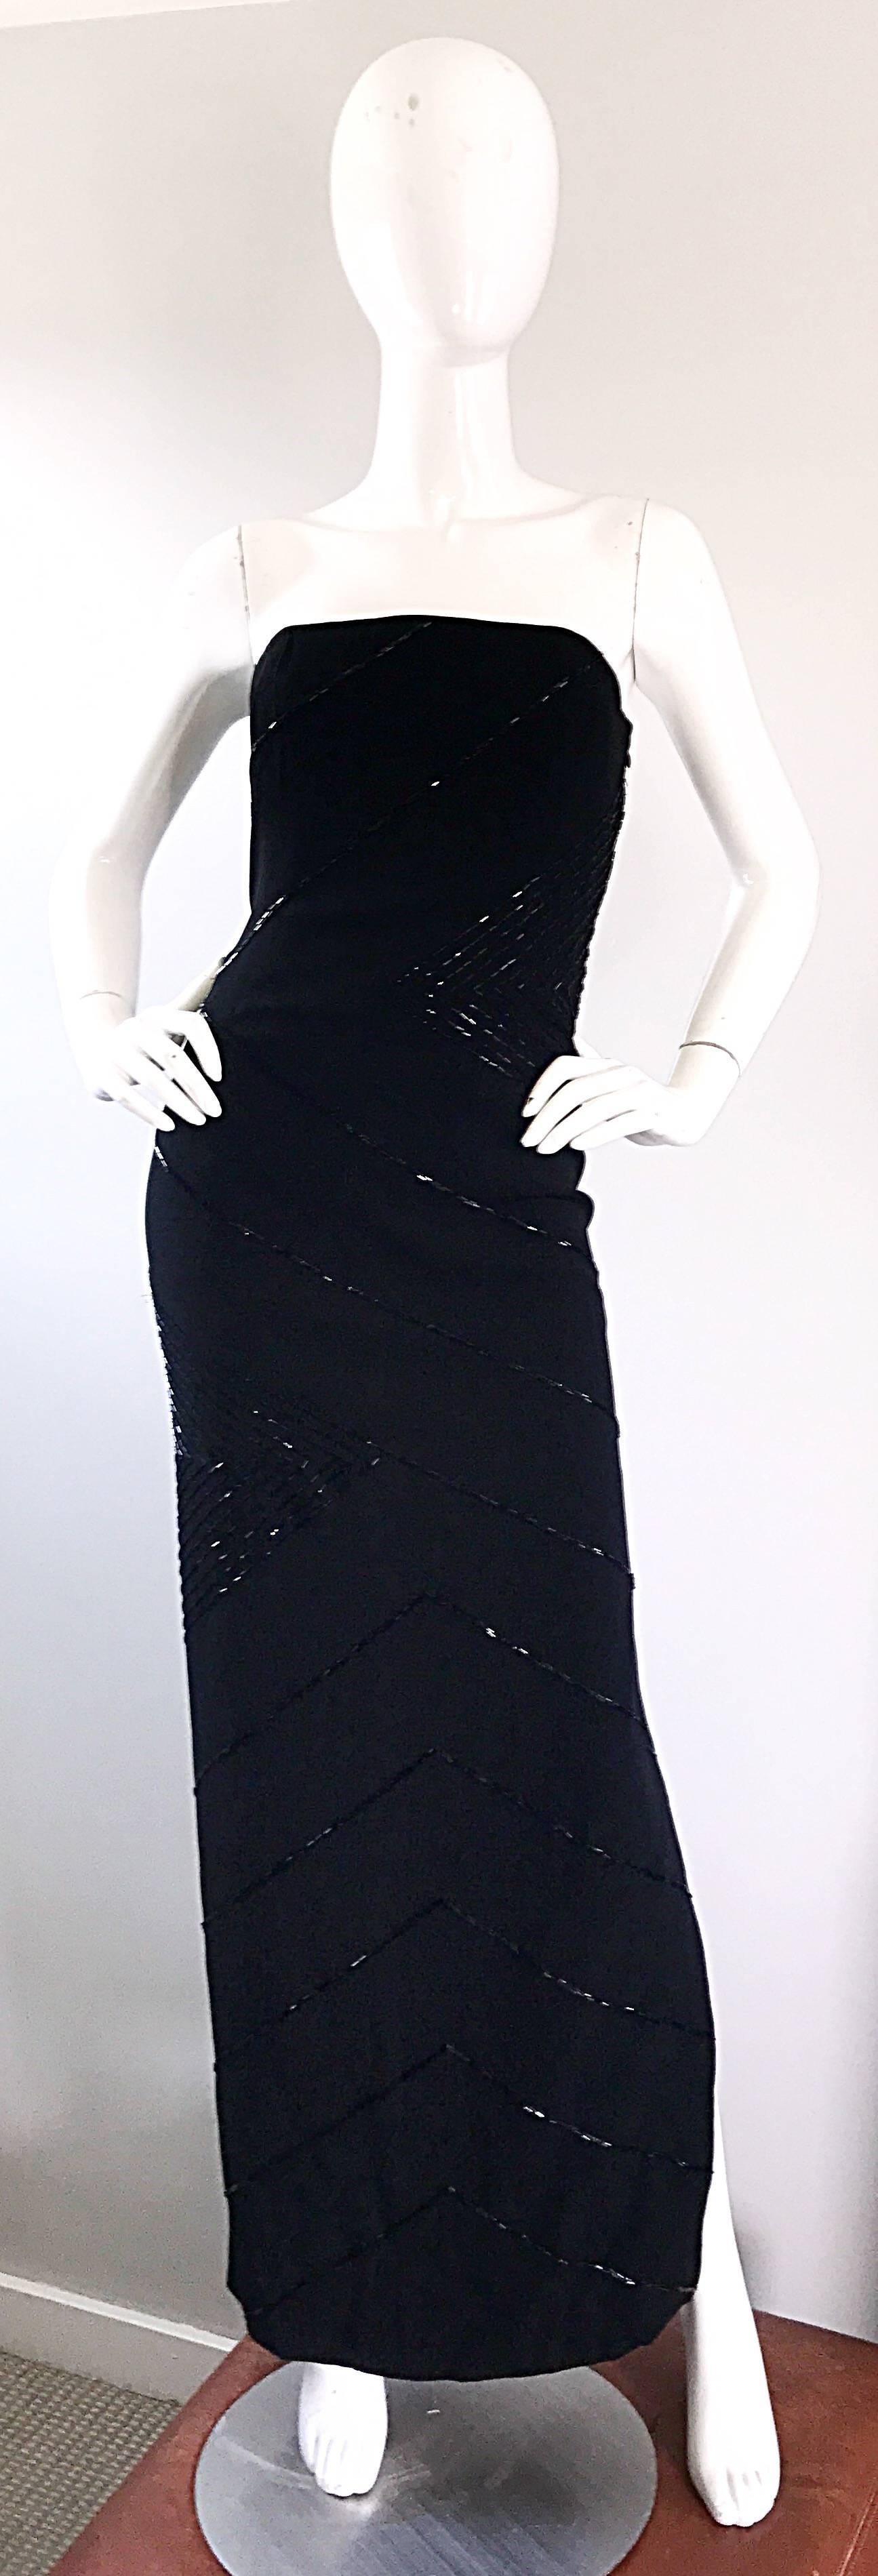 Stunning 1990s BILL BLASS black crepe beaded strapless evening gown! Features thousands of slimming black beads hand-sewn throughout. Interior boned bust helps keep everything in place, along with interior waist support. Hidden zipper up the side